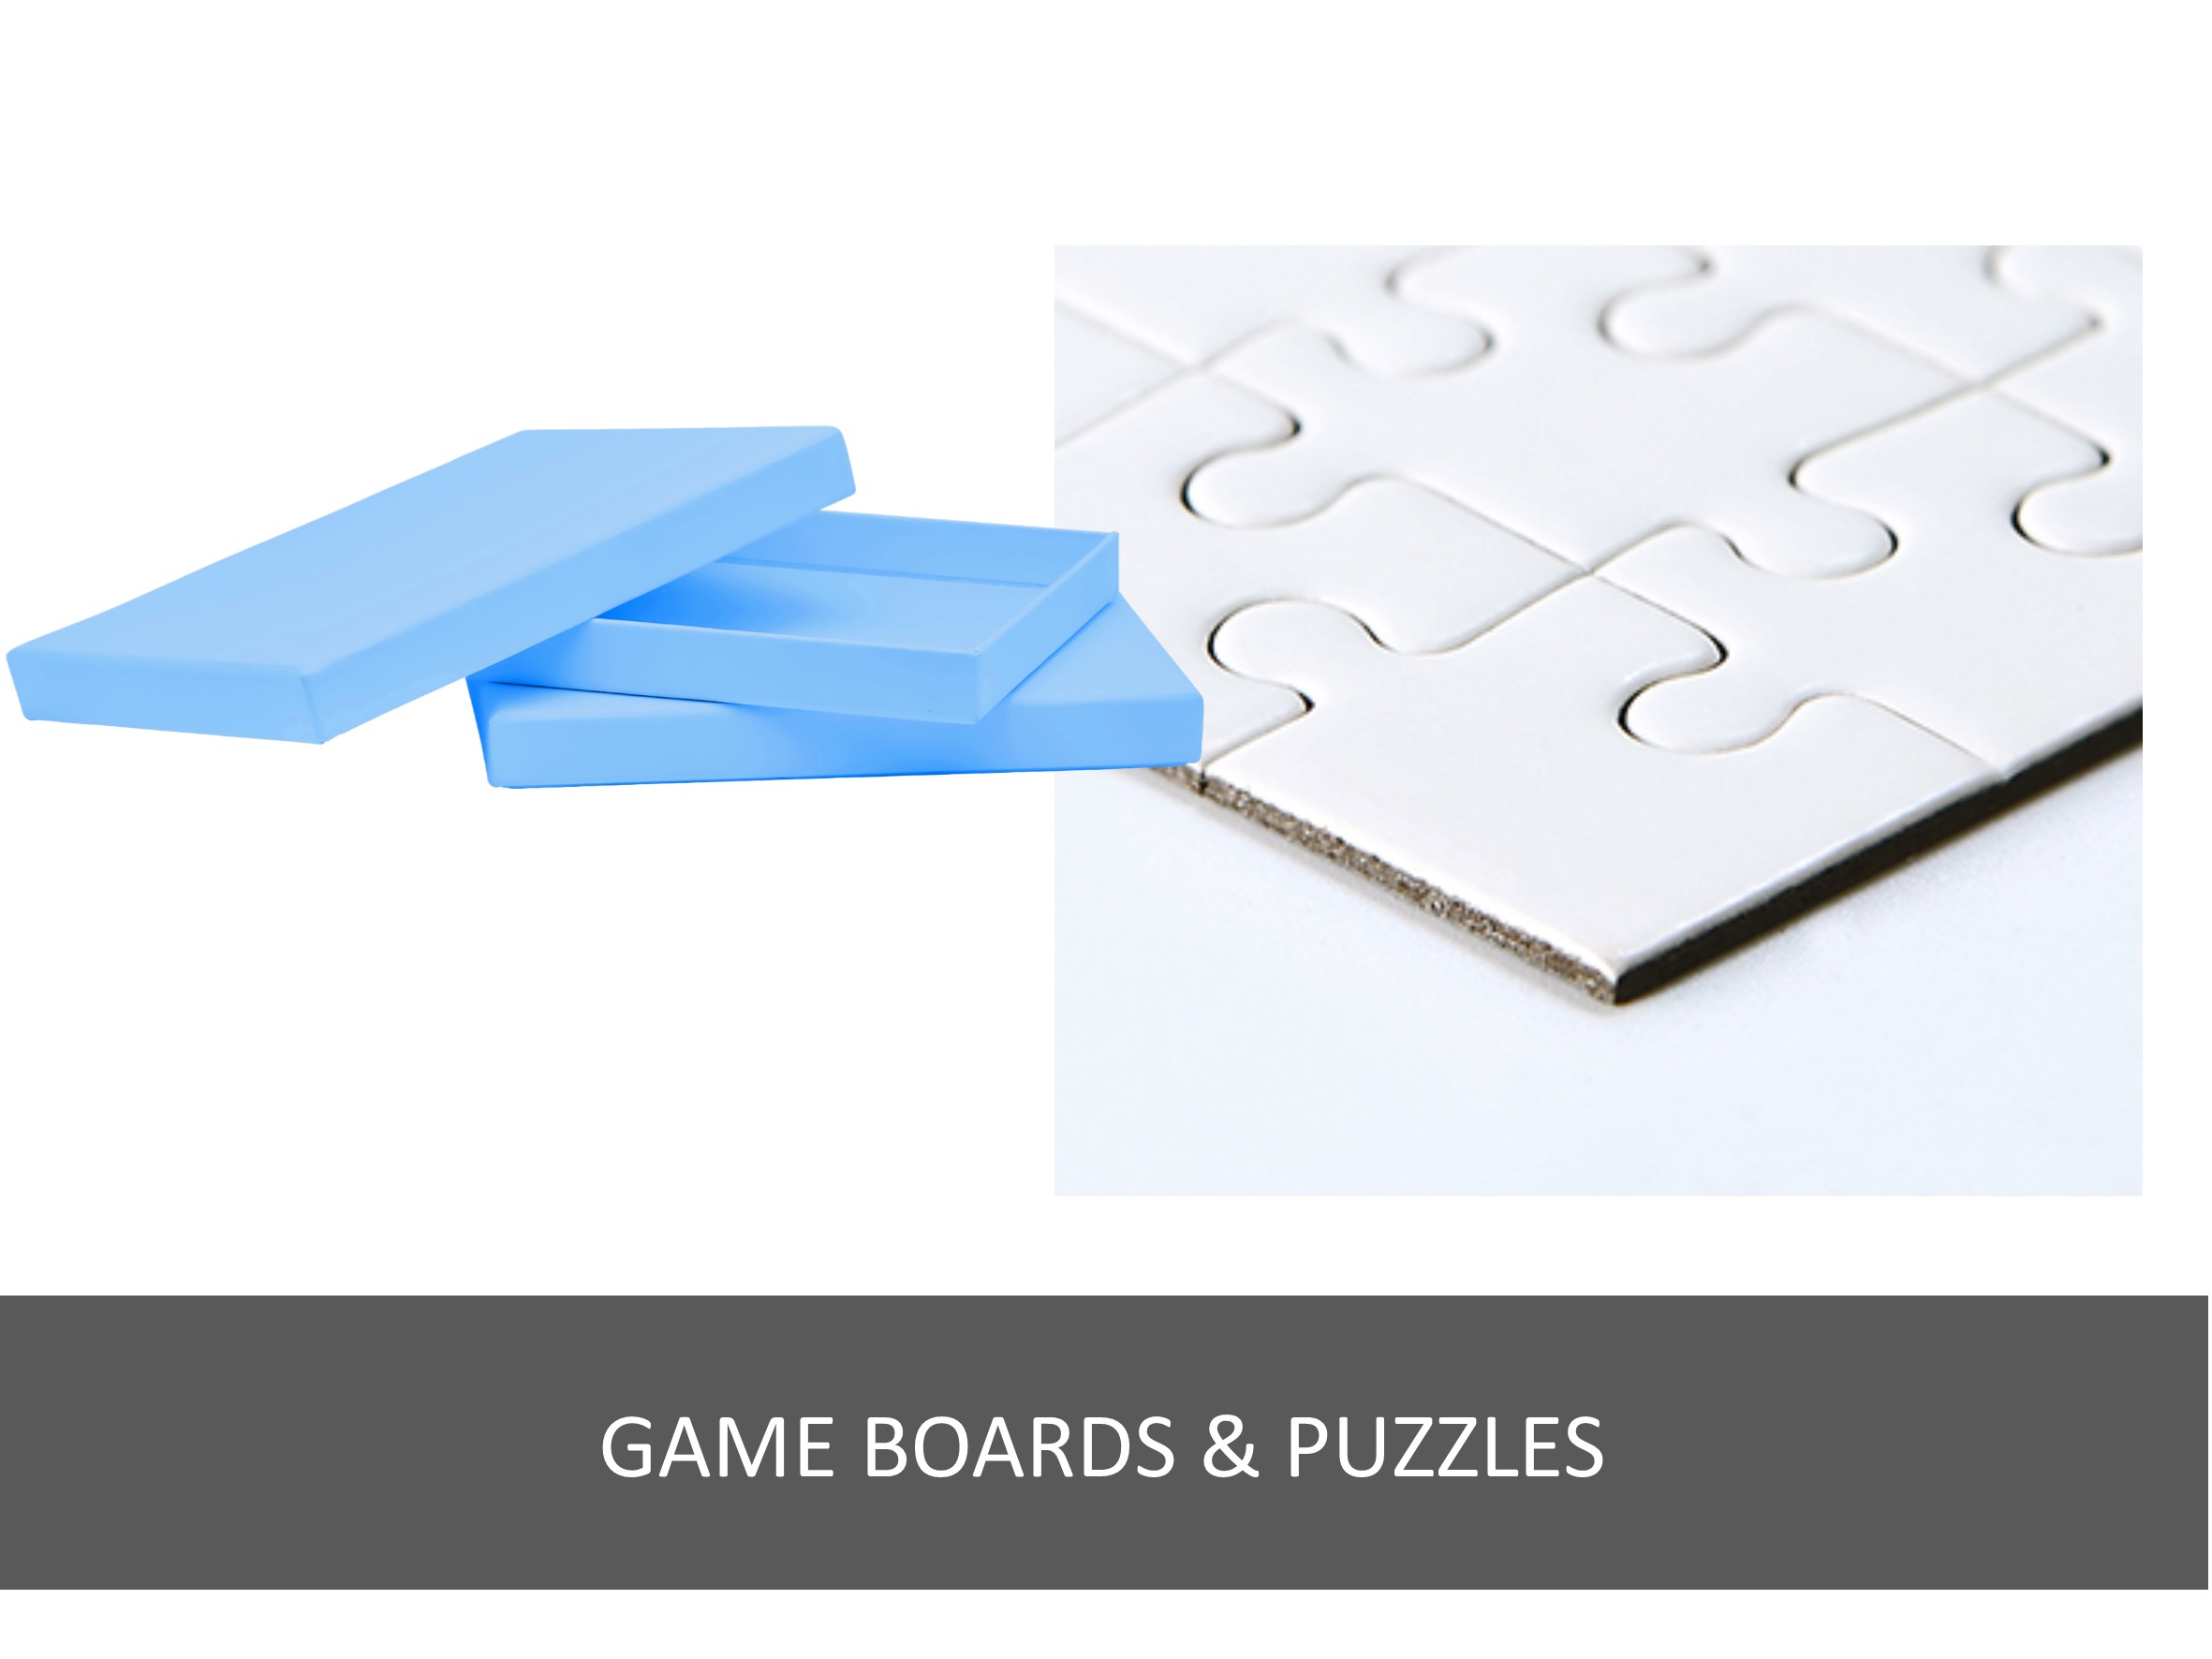 Game boards & puzzles